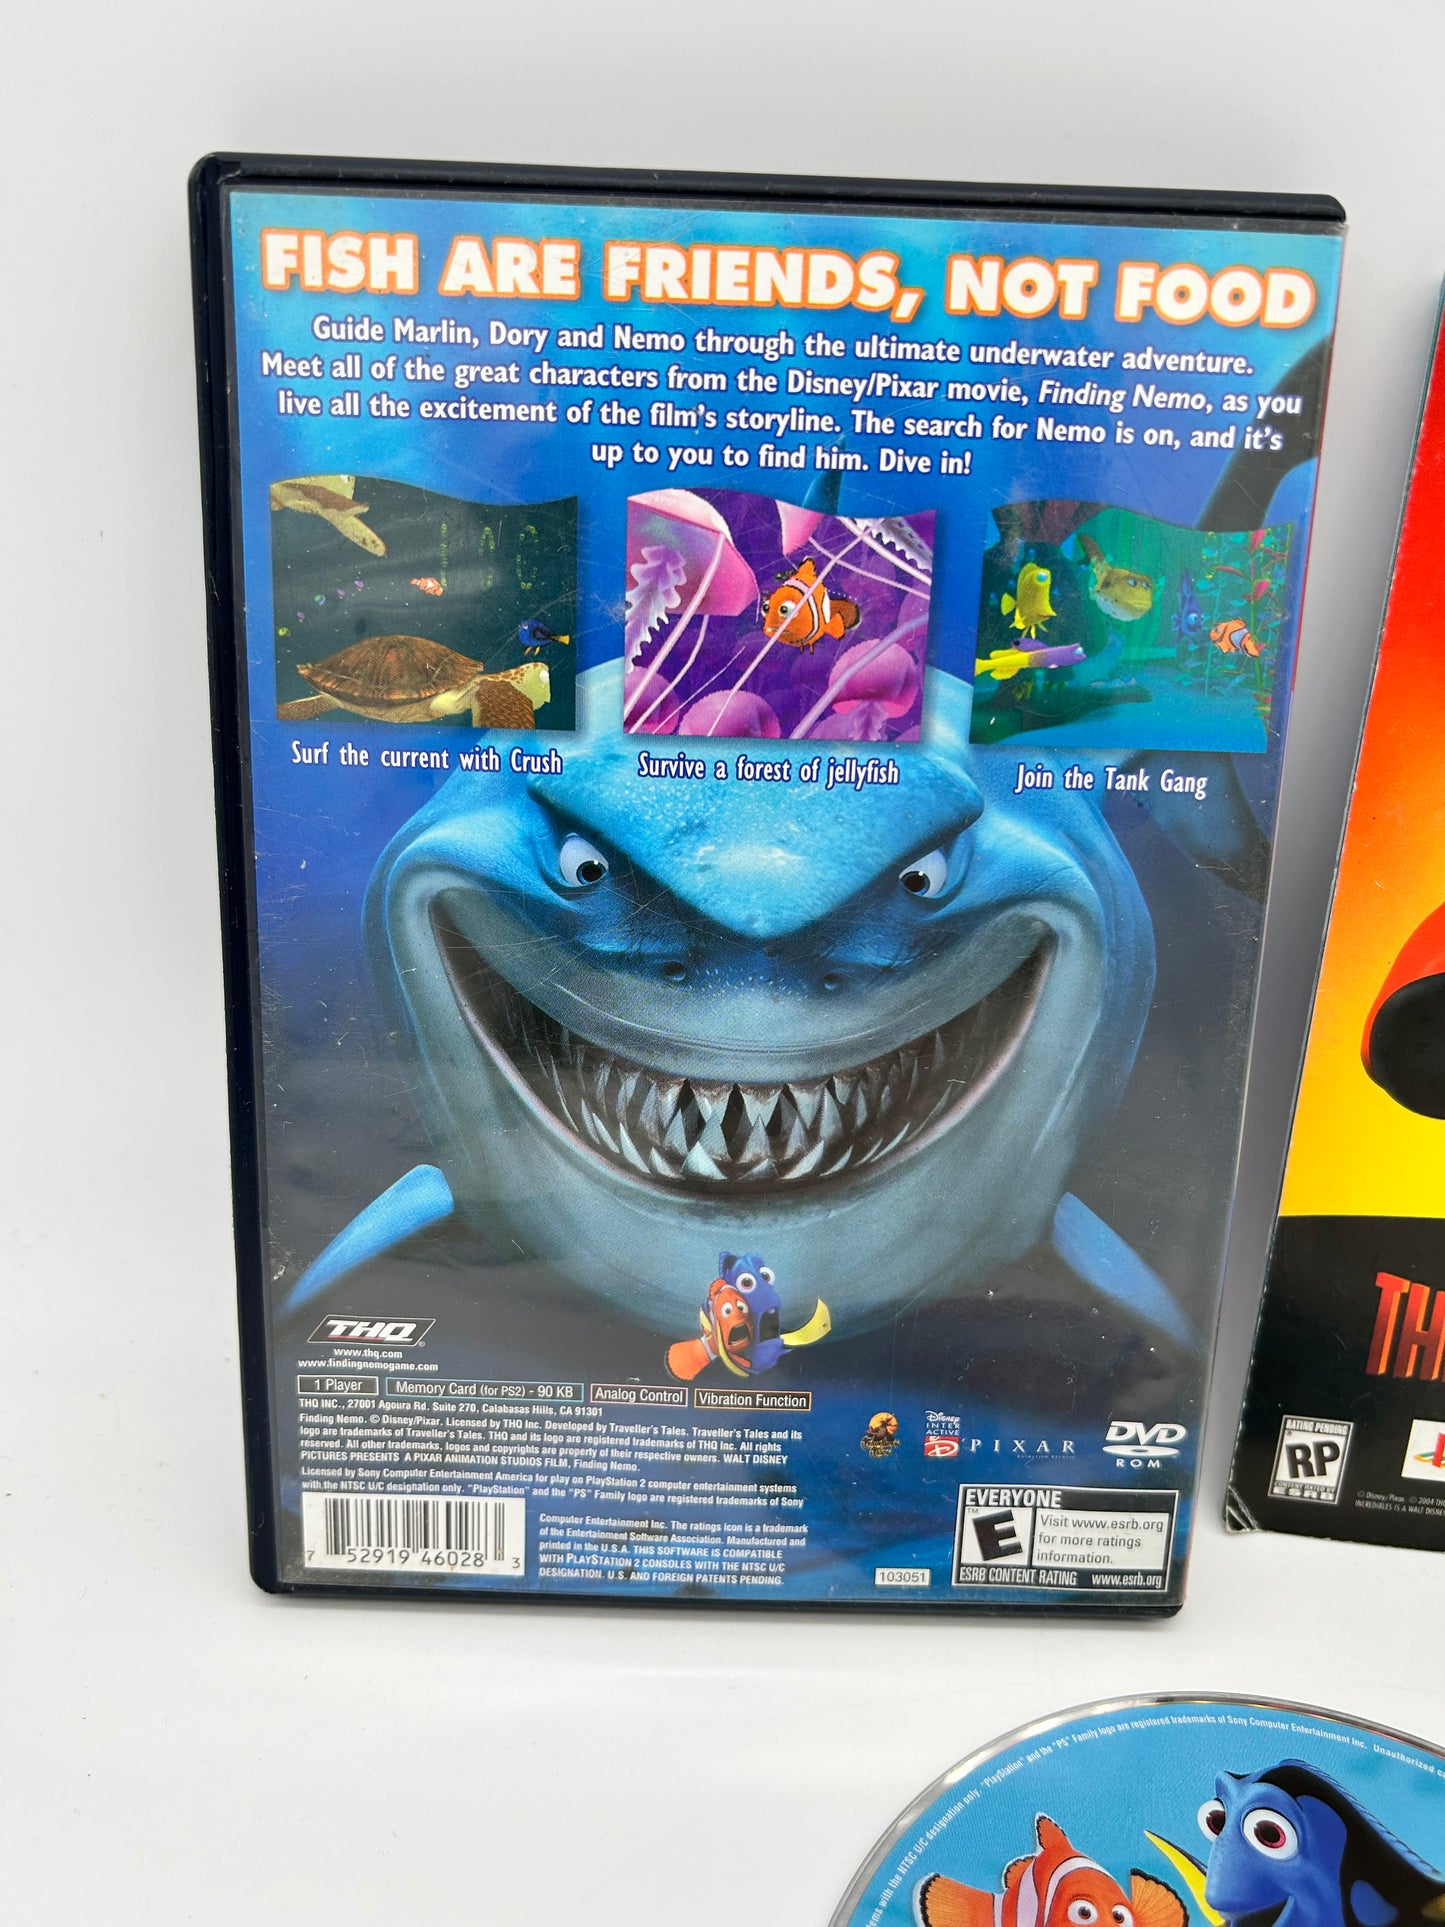 SONY PLAYSTATiON 2 [PS2] | FiNDiNG NEMO | GREATEST HiTS